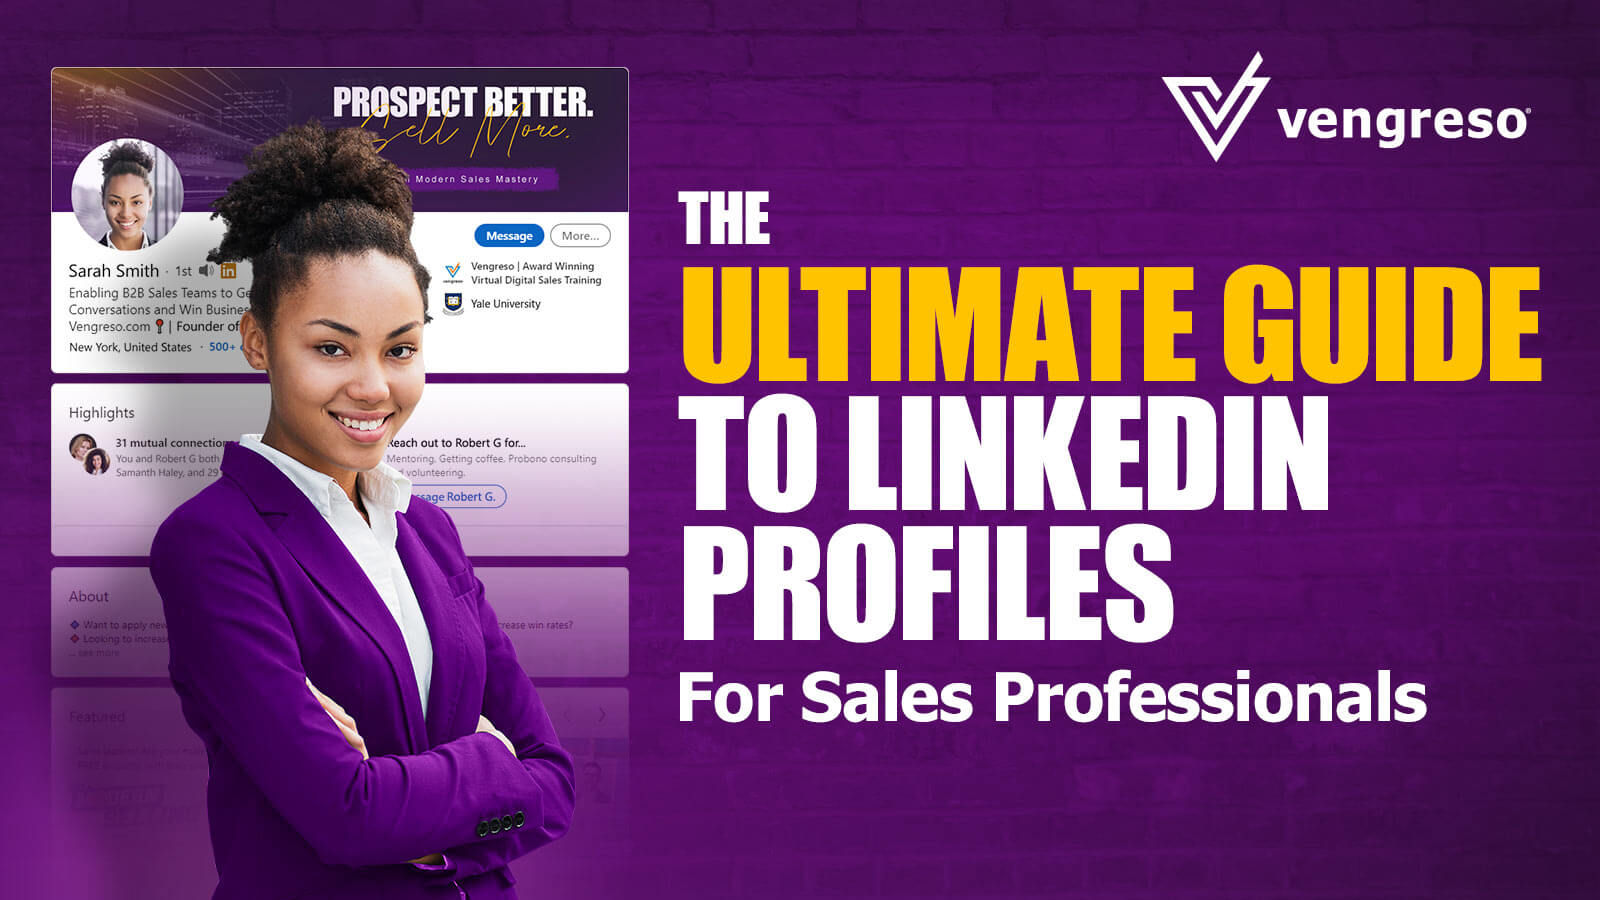 The Ultimate Guide to LinkedIn Profiles for Sales Professionals